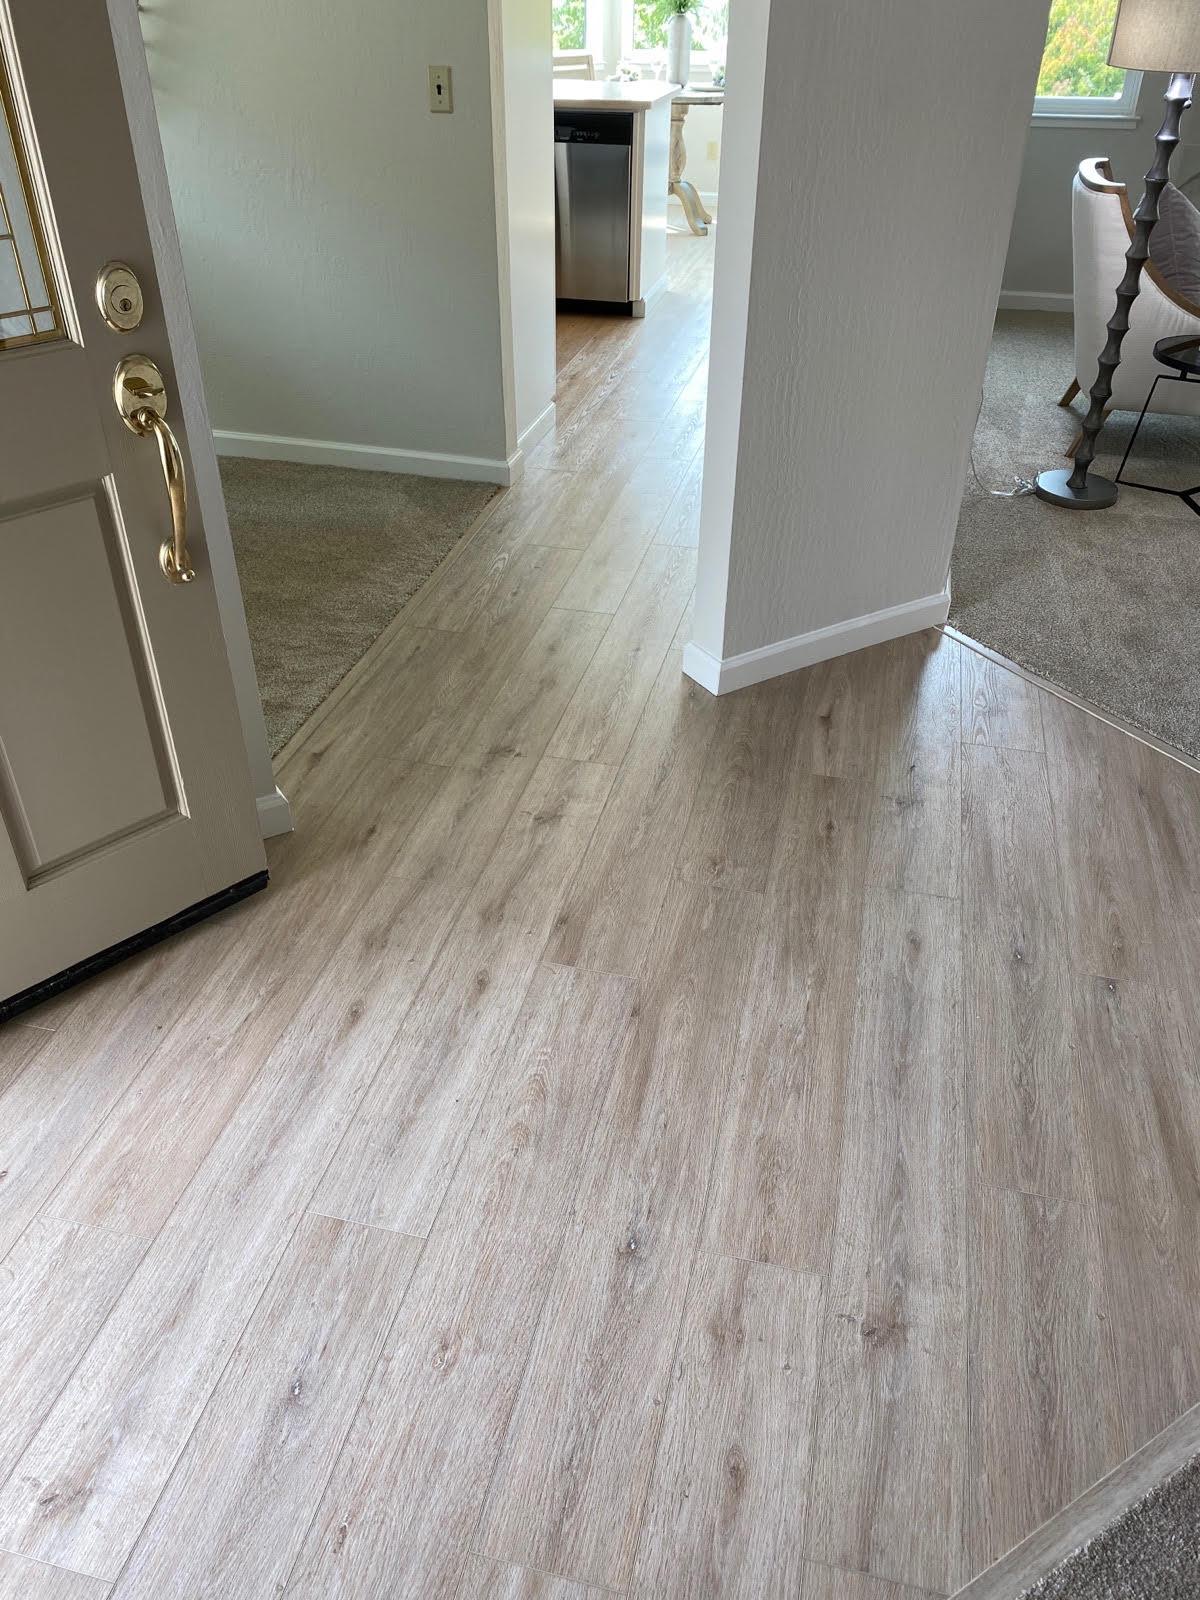 Picture of Pacific Coast Carpet installed this flooring. - Pacific Coast Carpet, Inc.